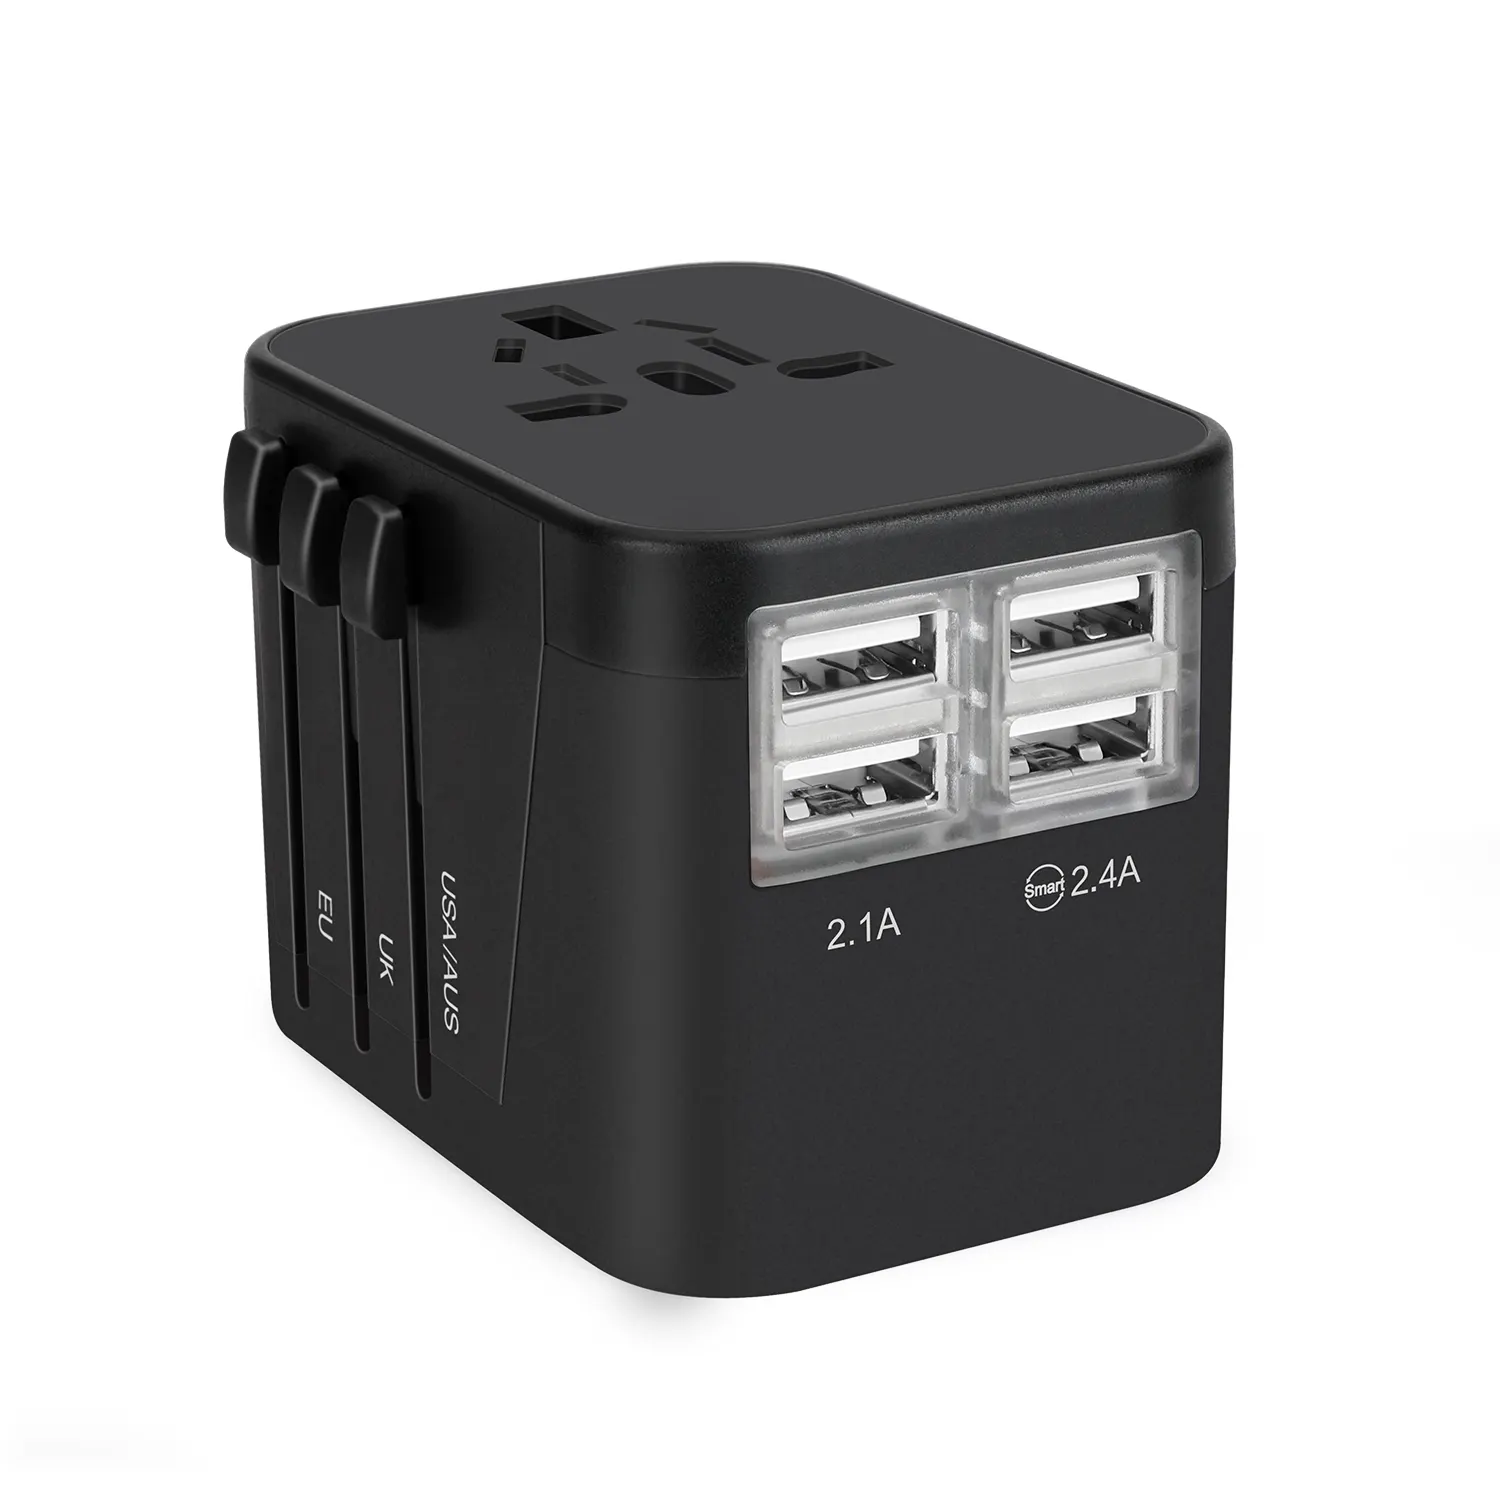 Wontravel 5V 2.4A OEM Electric Plug Power Adapter 4 In 1 Portable Universal Travel Adapter Converter